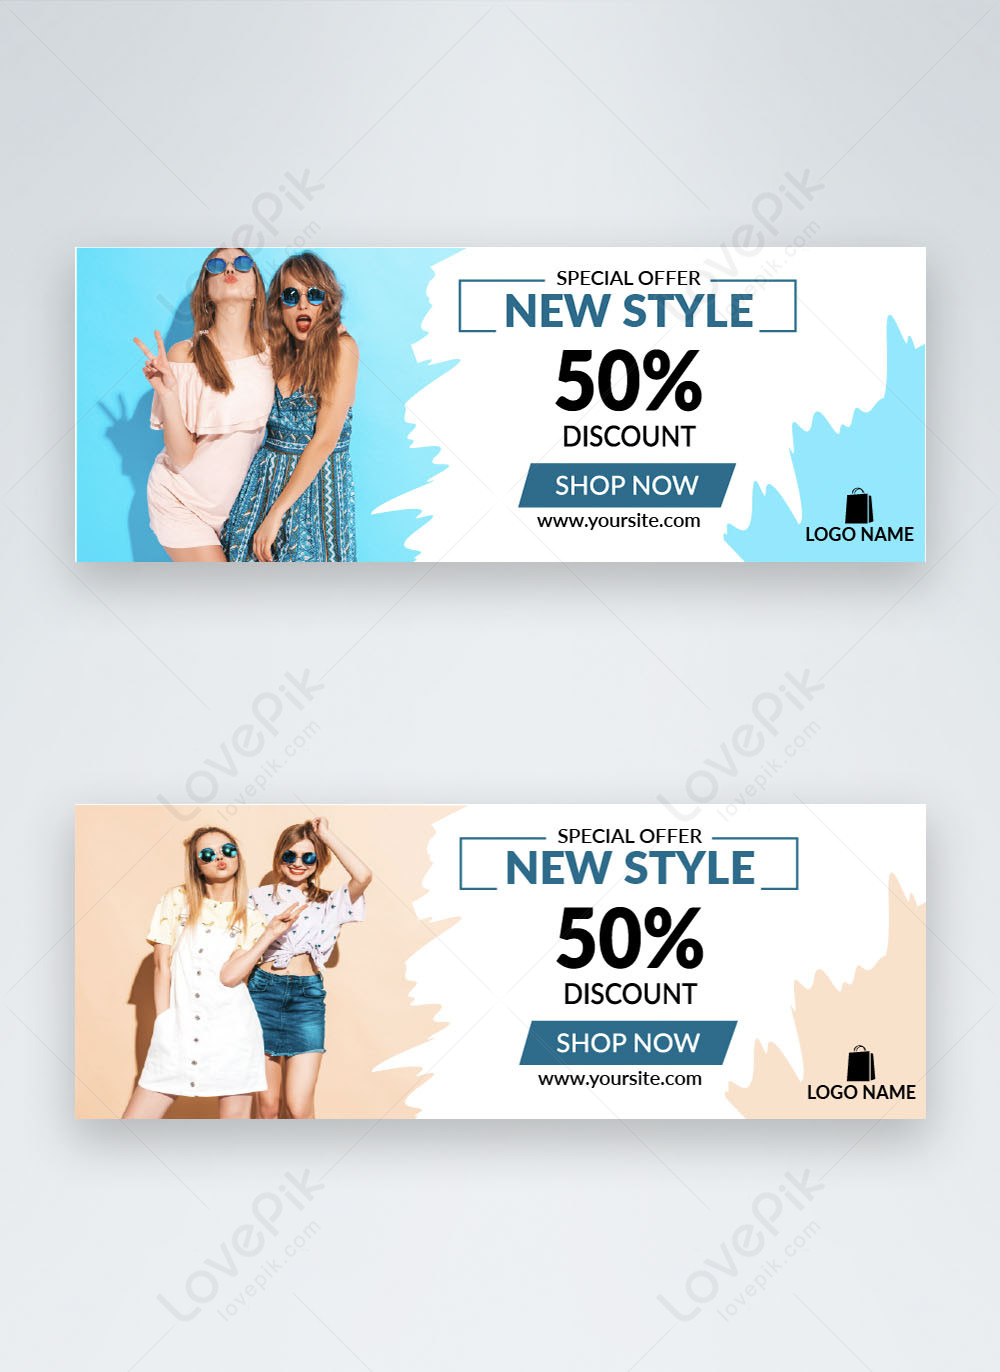 Pink And Blue Fashion Facebook Cover Template Image_Picture Free Download  450034568_Lovepik.Com